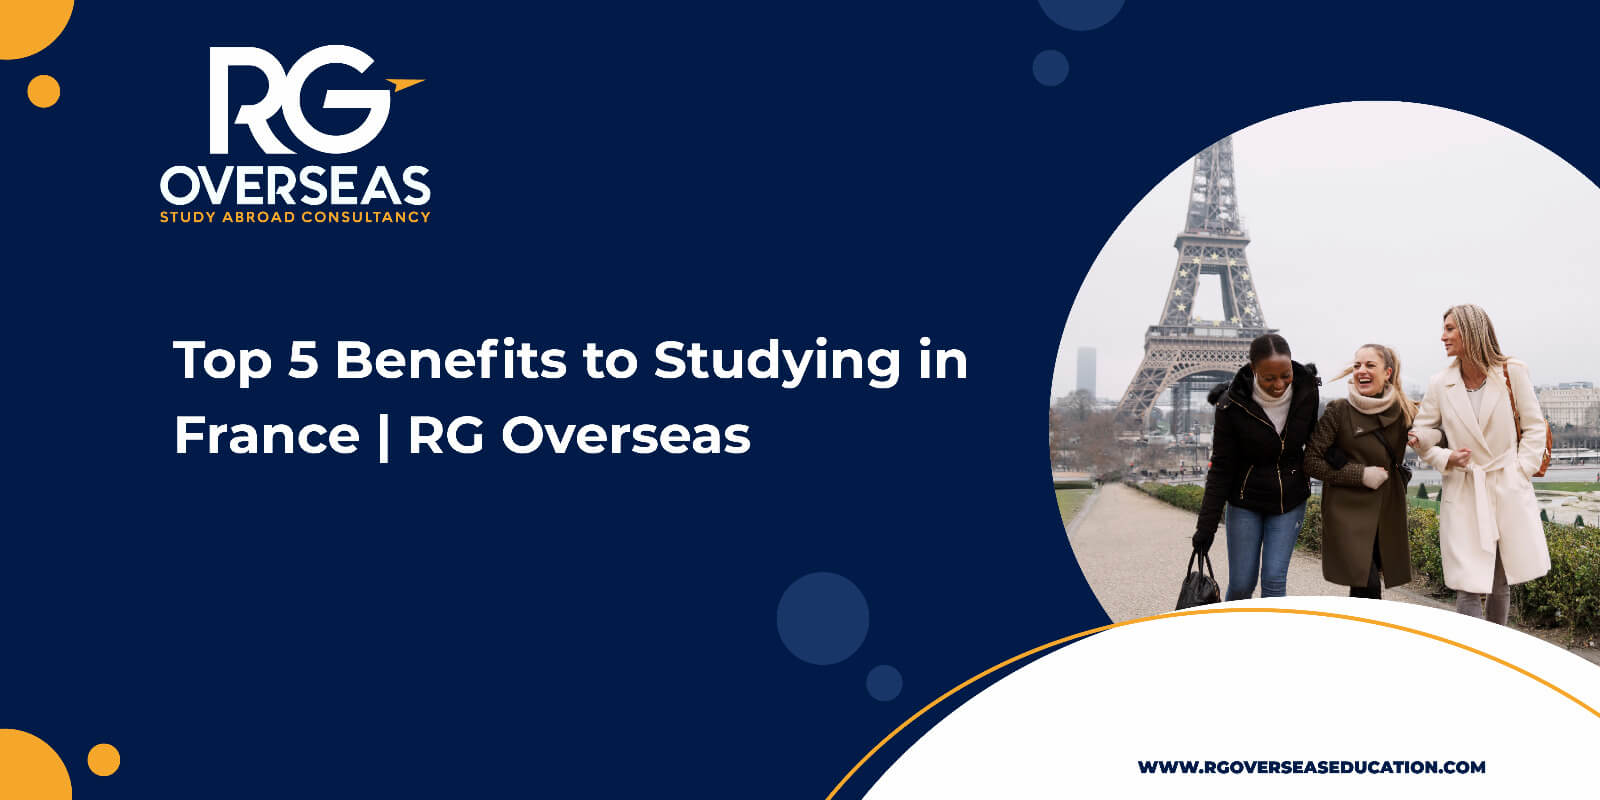 Top 5 Benefits to Studying in France